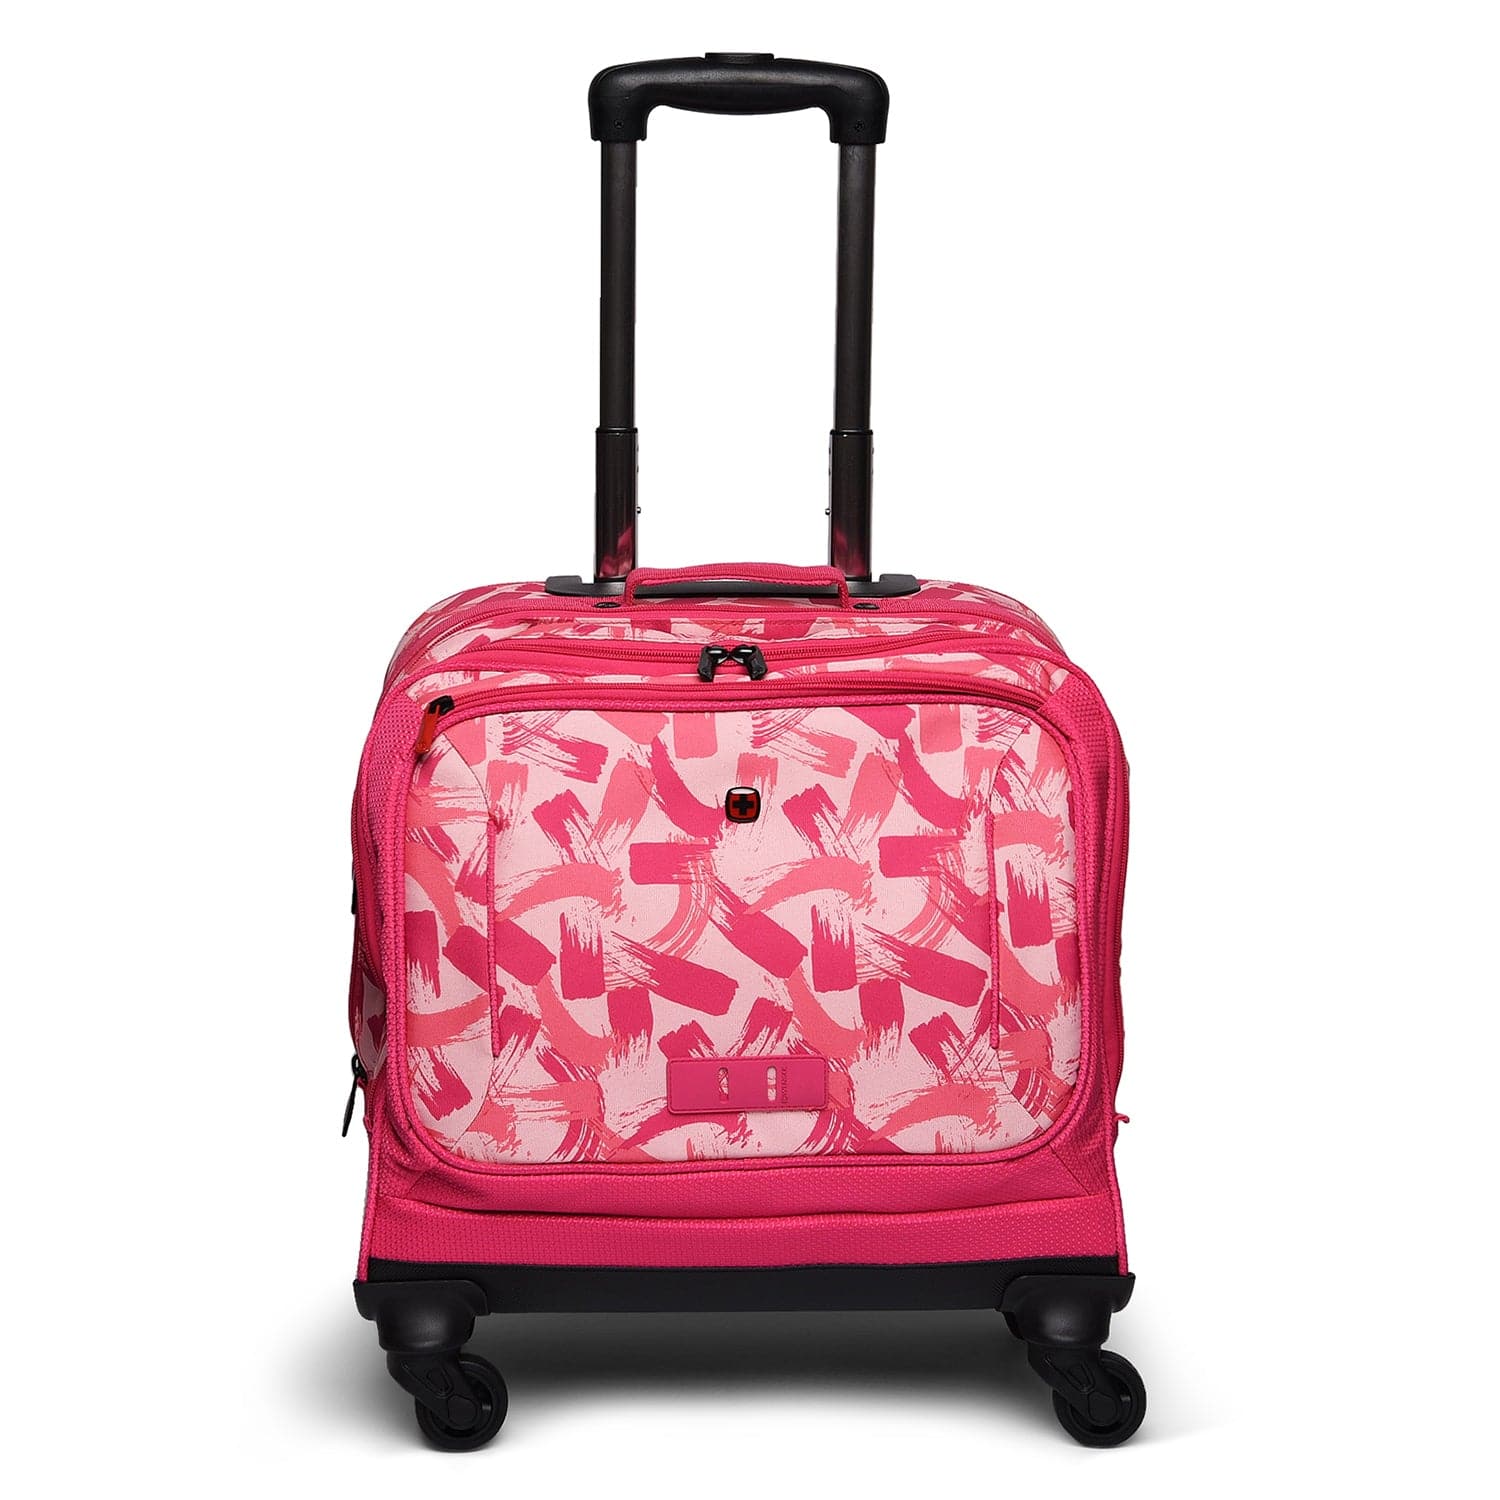 Wenger Back To School 3 Piece Set Pink - 653120